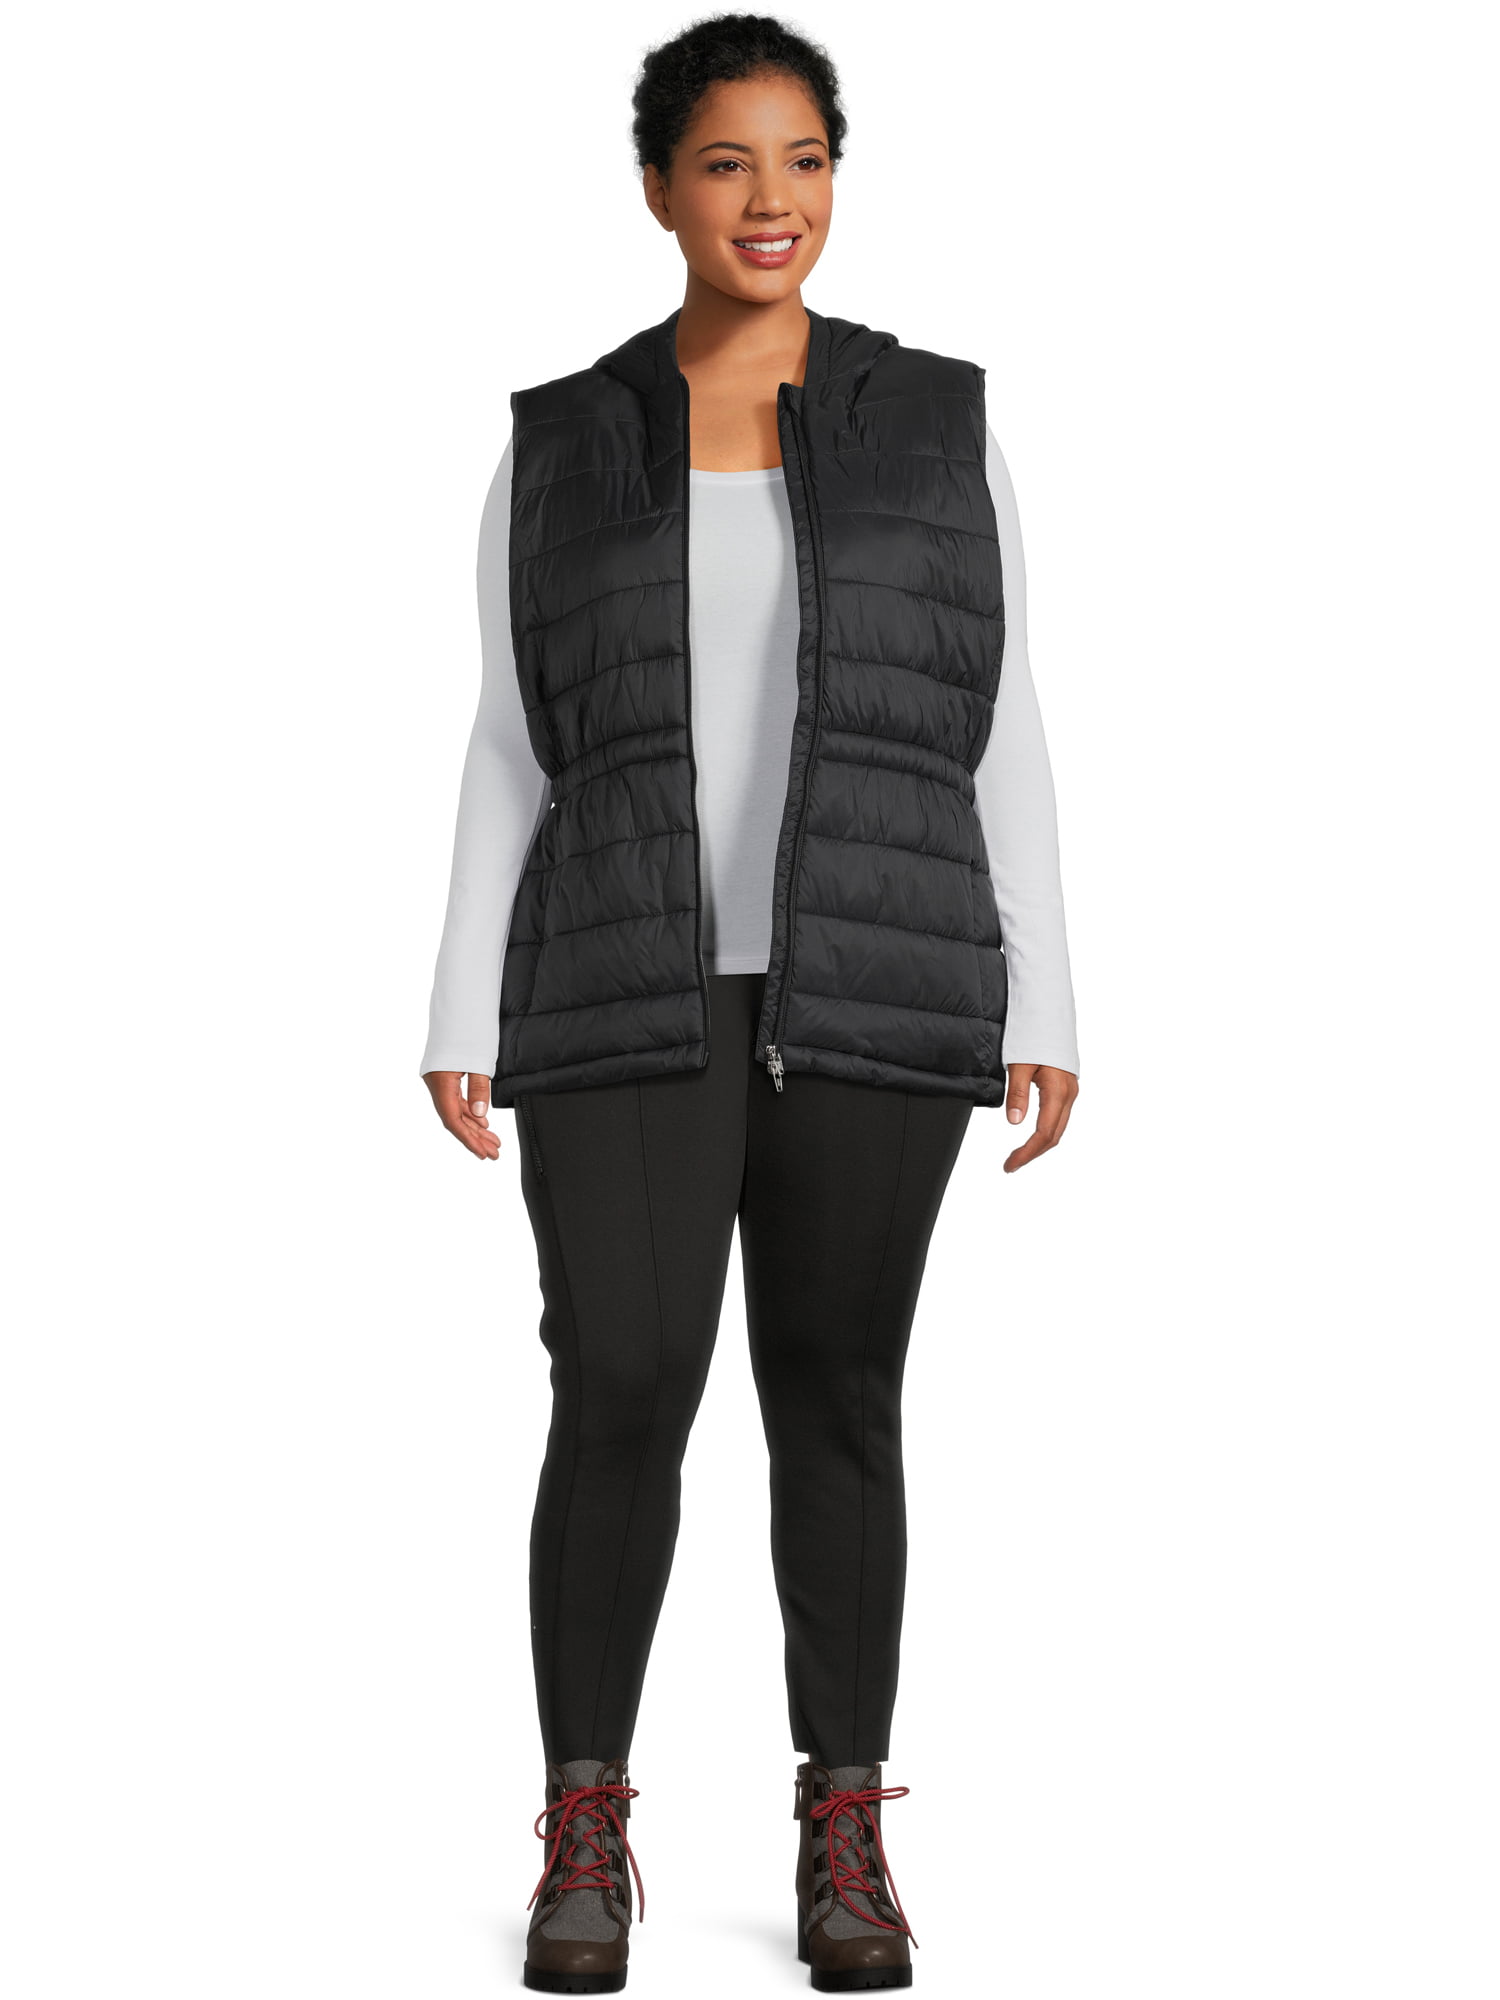 Swiss Tech Hooded Vest with Cinched Waist, Terra & Sky Long Sleeve T-Shirt,  Time and Tru Faux Leather Leggings and Chelsea Boots - Walmart Finds